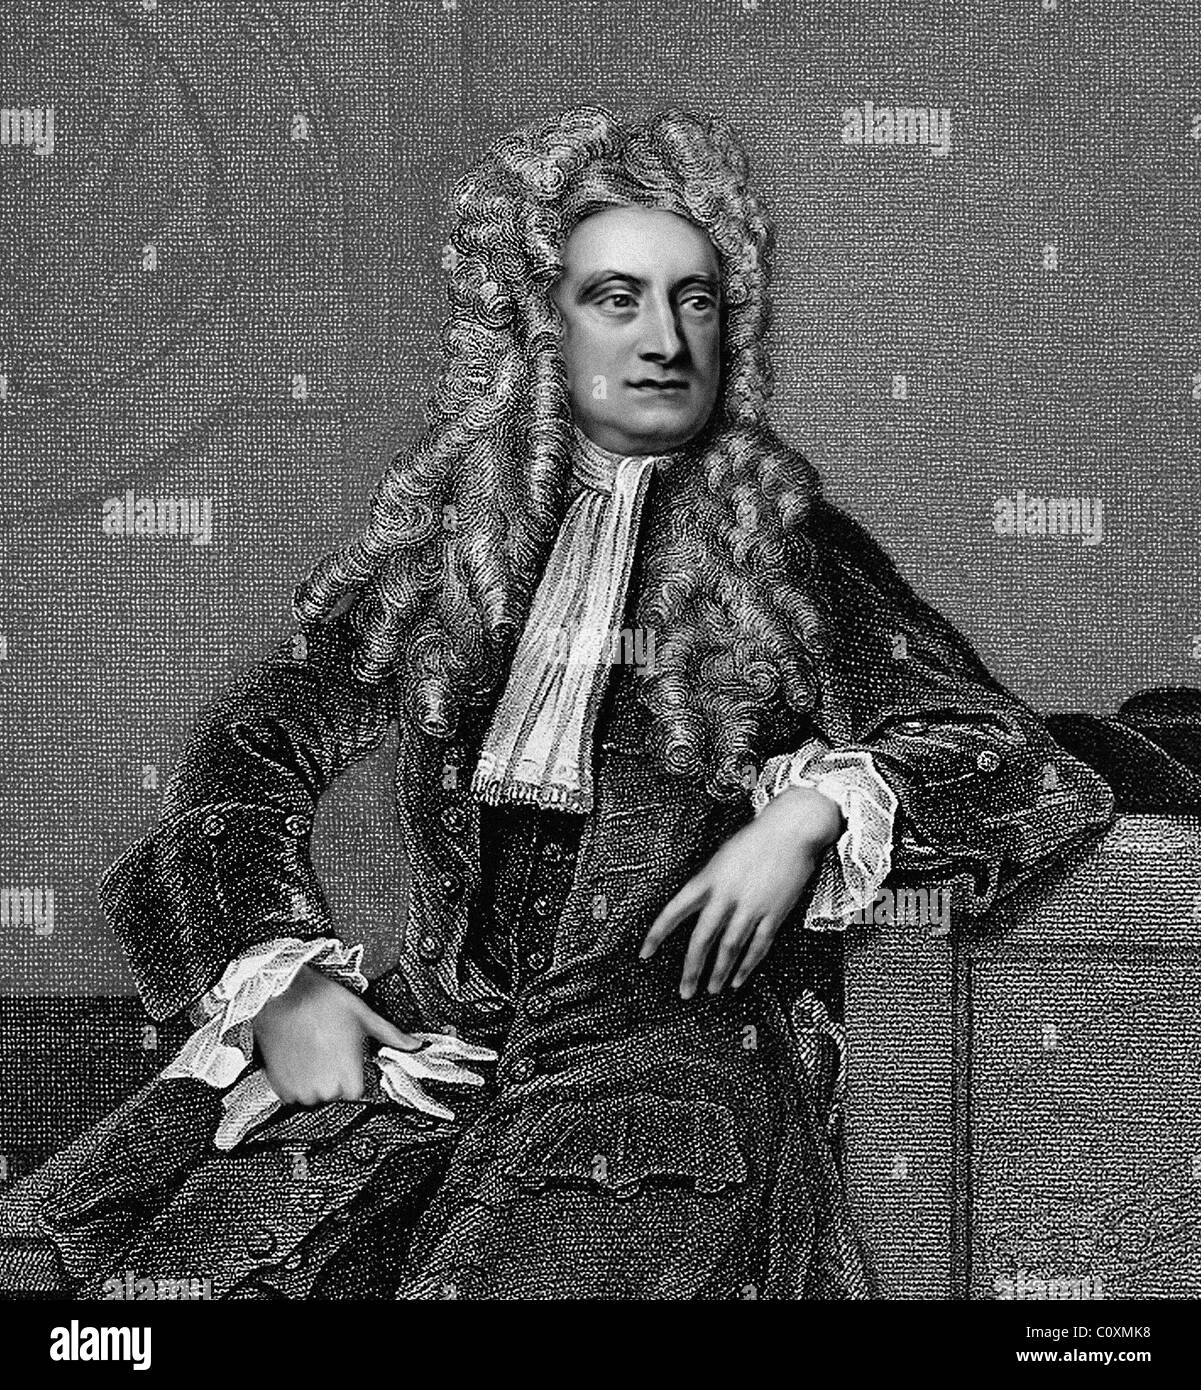 Isaac Newton 1642 1727 English Scientist Mathematician Illustration from an Engraving Stock Photo